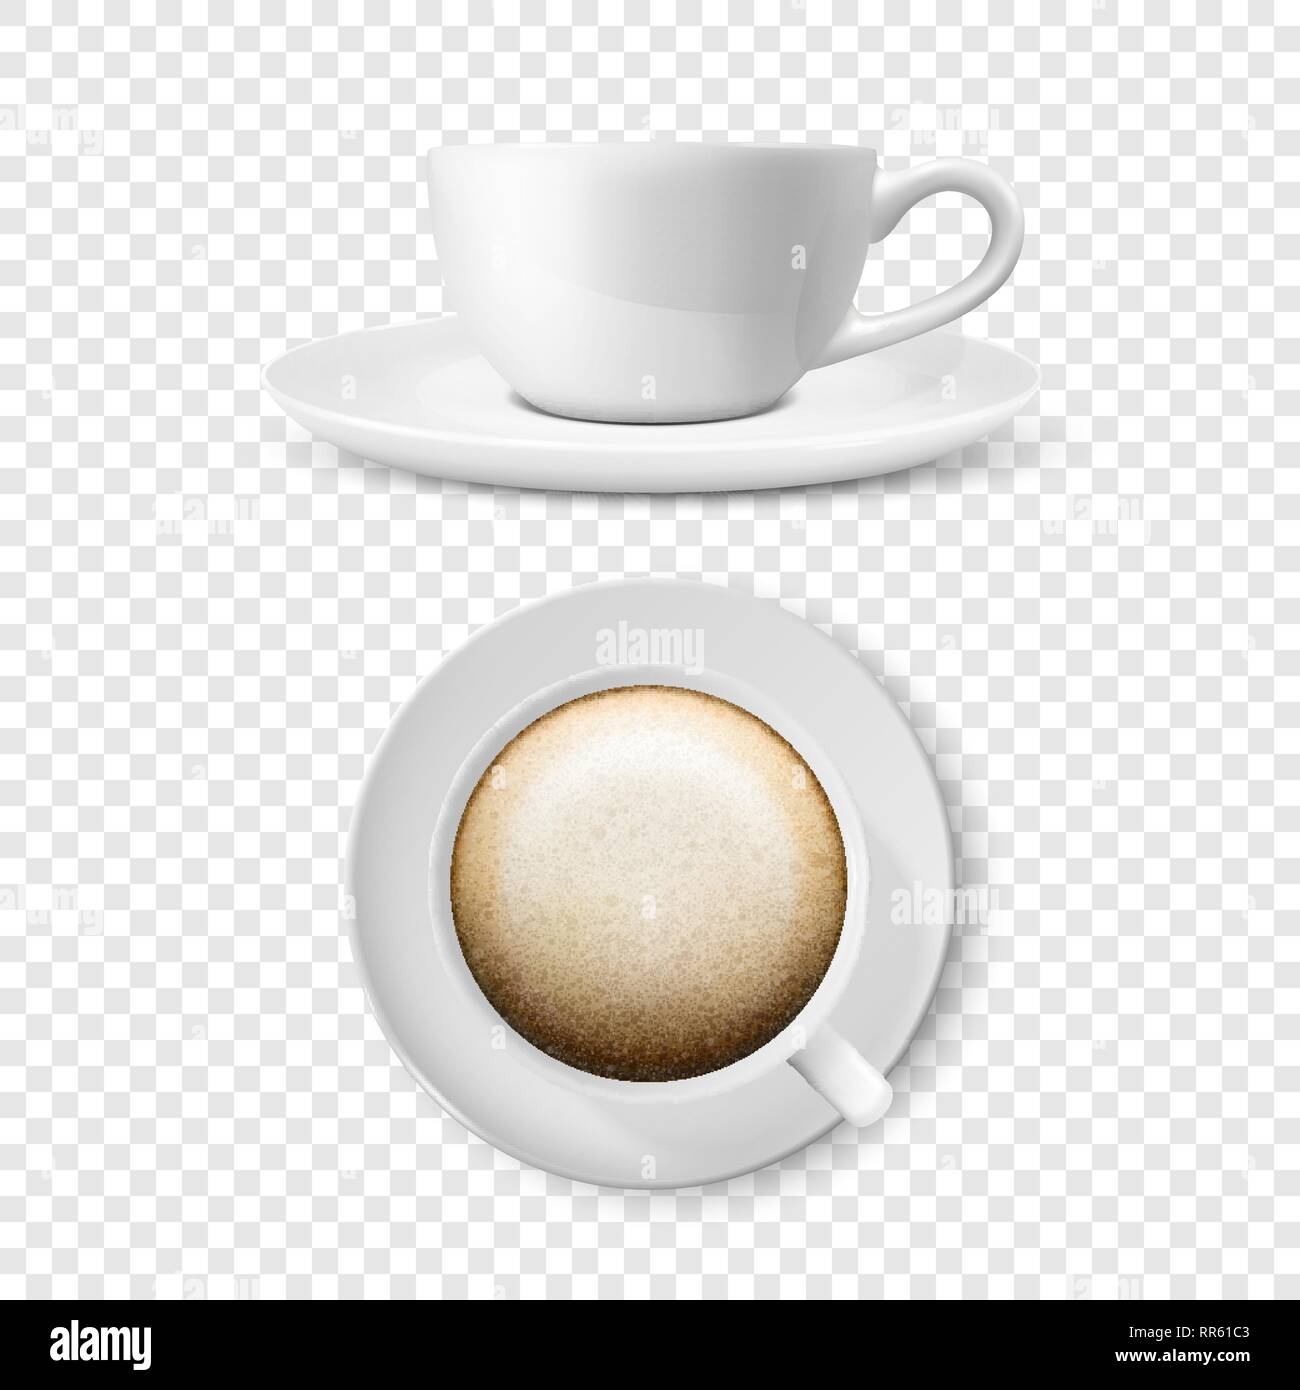 https://c8.alamy.com/comp/RR61C3/realistic-vector-3d-glossy-blank-white-coffee-cup-or-mug-set-with-cappuccino-coffee-closeup-isolated-design-template-of-coffee-mug-or-cup-and-saucer-RR61C3.jpg